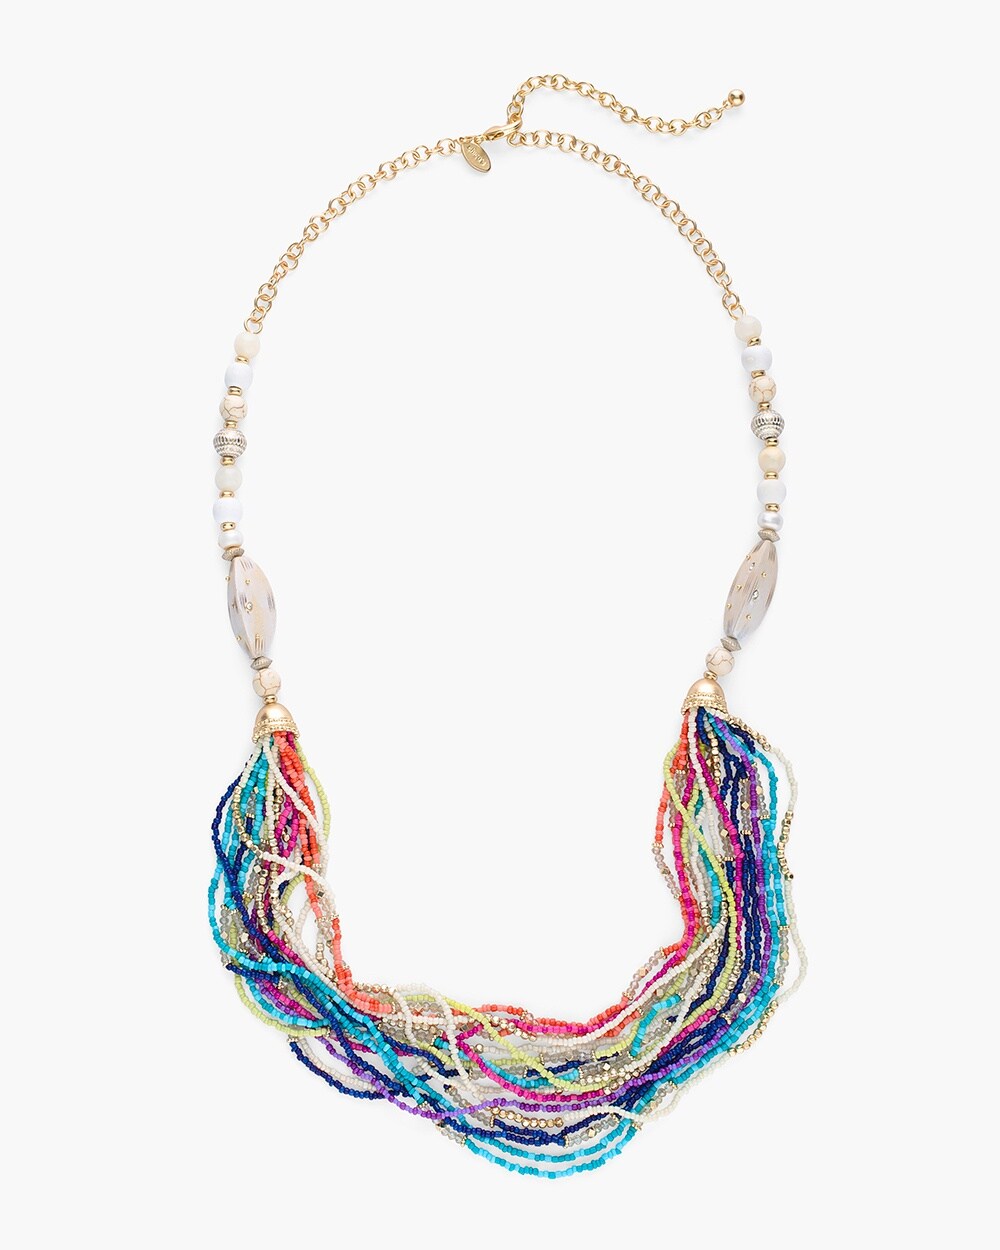 Multi-Colored Seed Bead Necklace